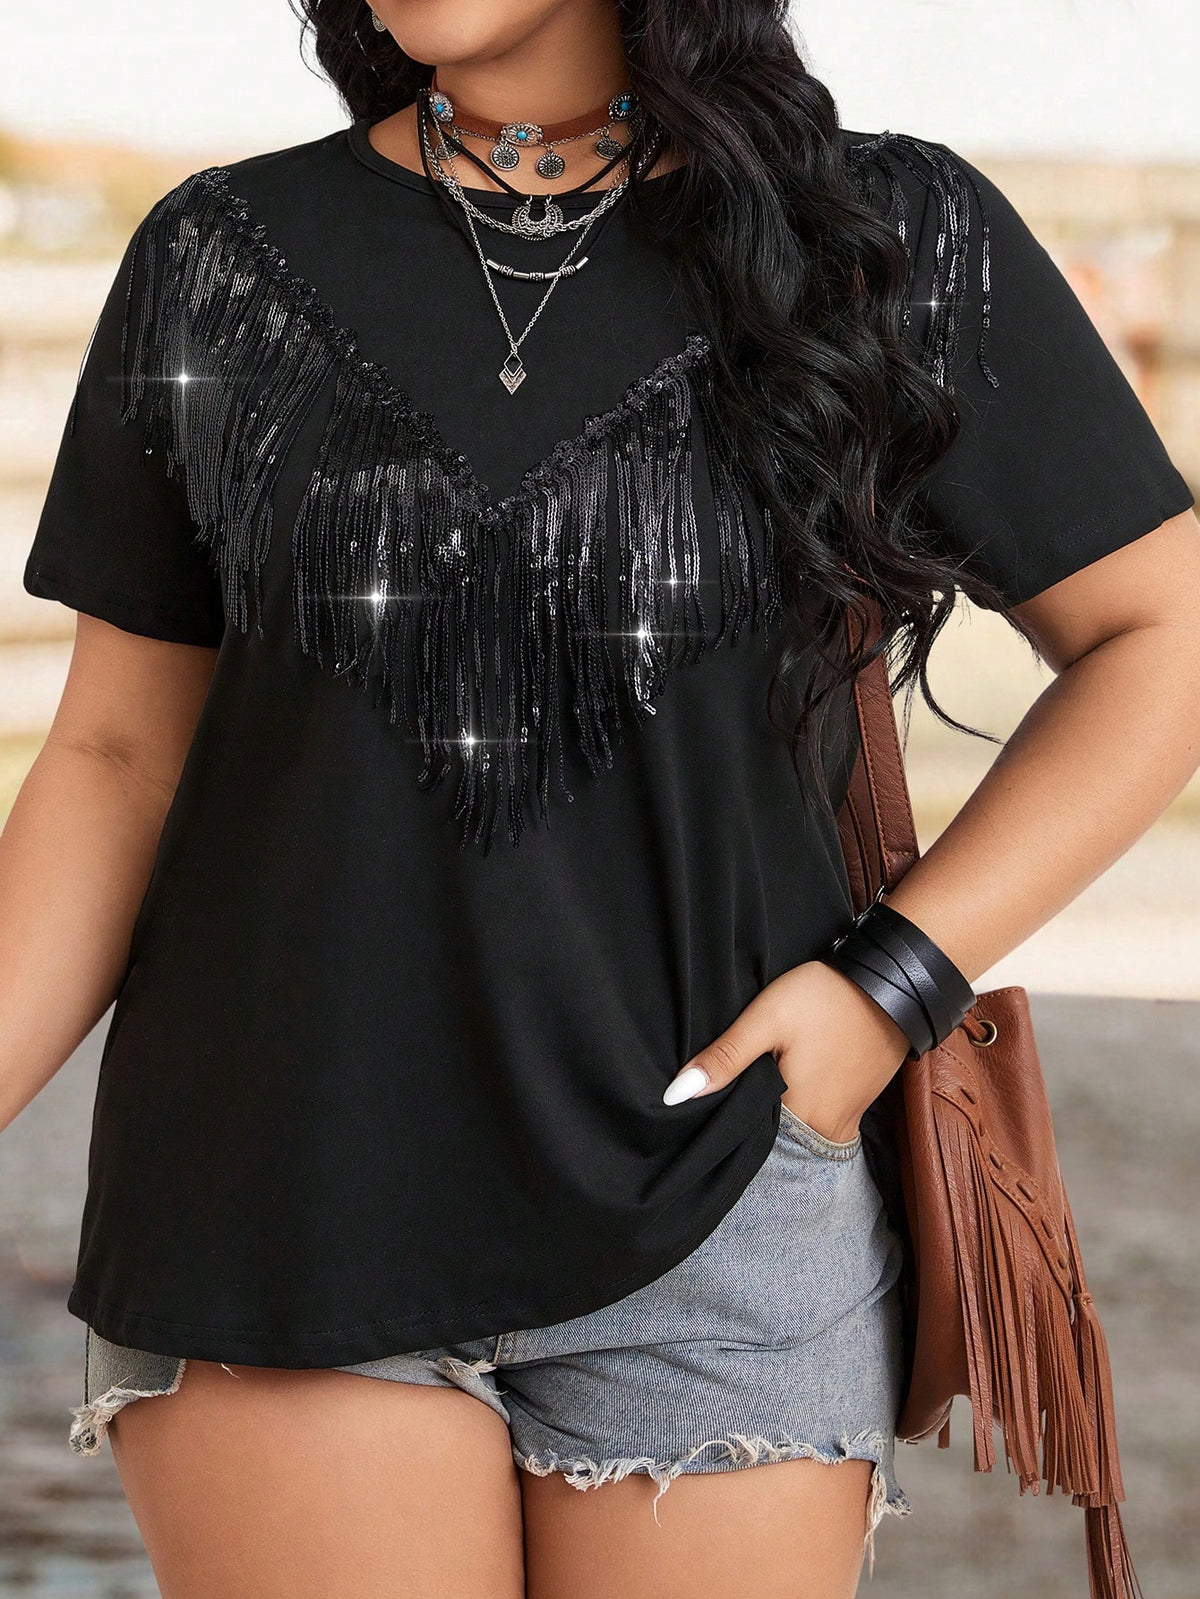 LUNE Plus Size Music Festival Party Western Casual Fashion T-Shirt With Fringe, Sequins, Casual Vacation T-Shirt